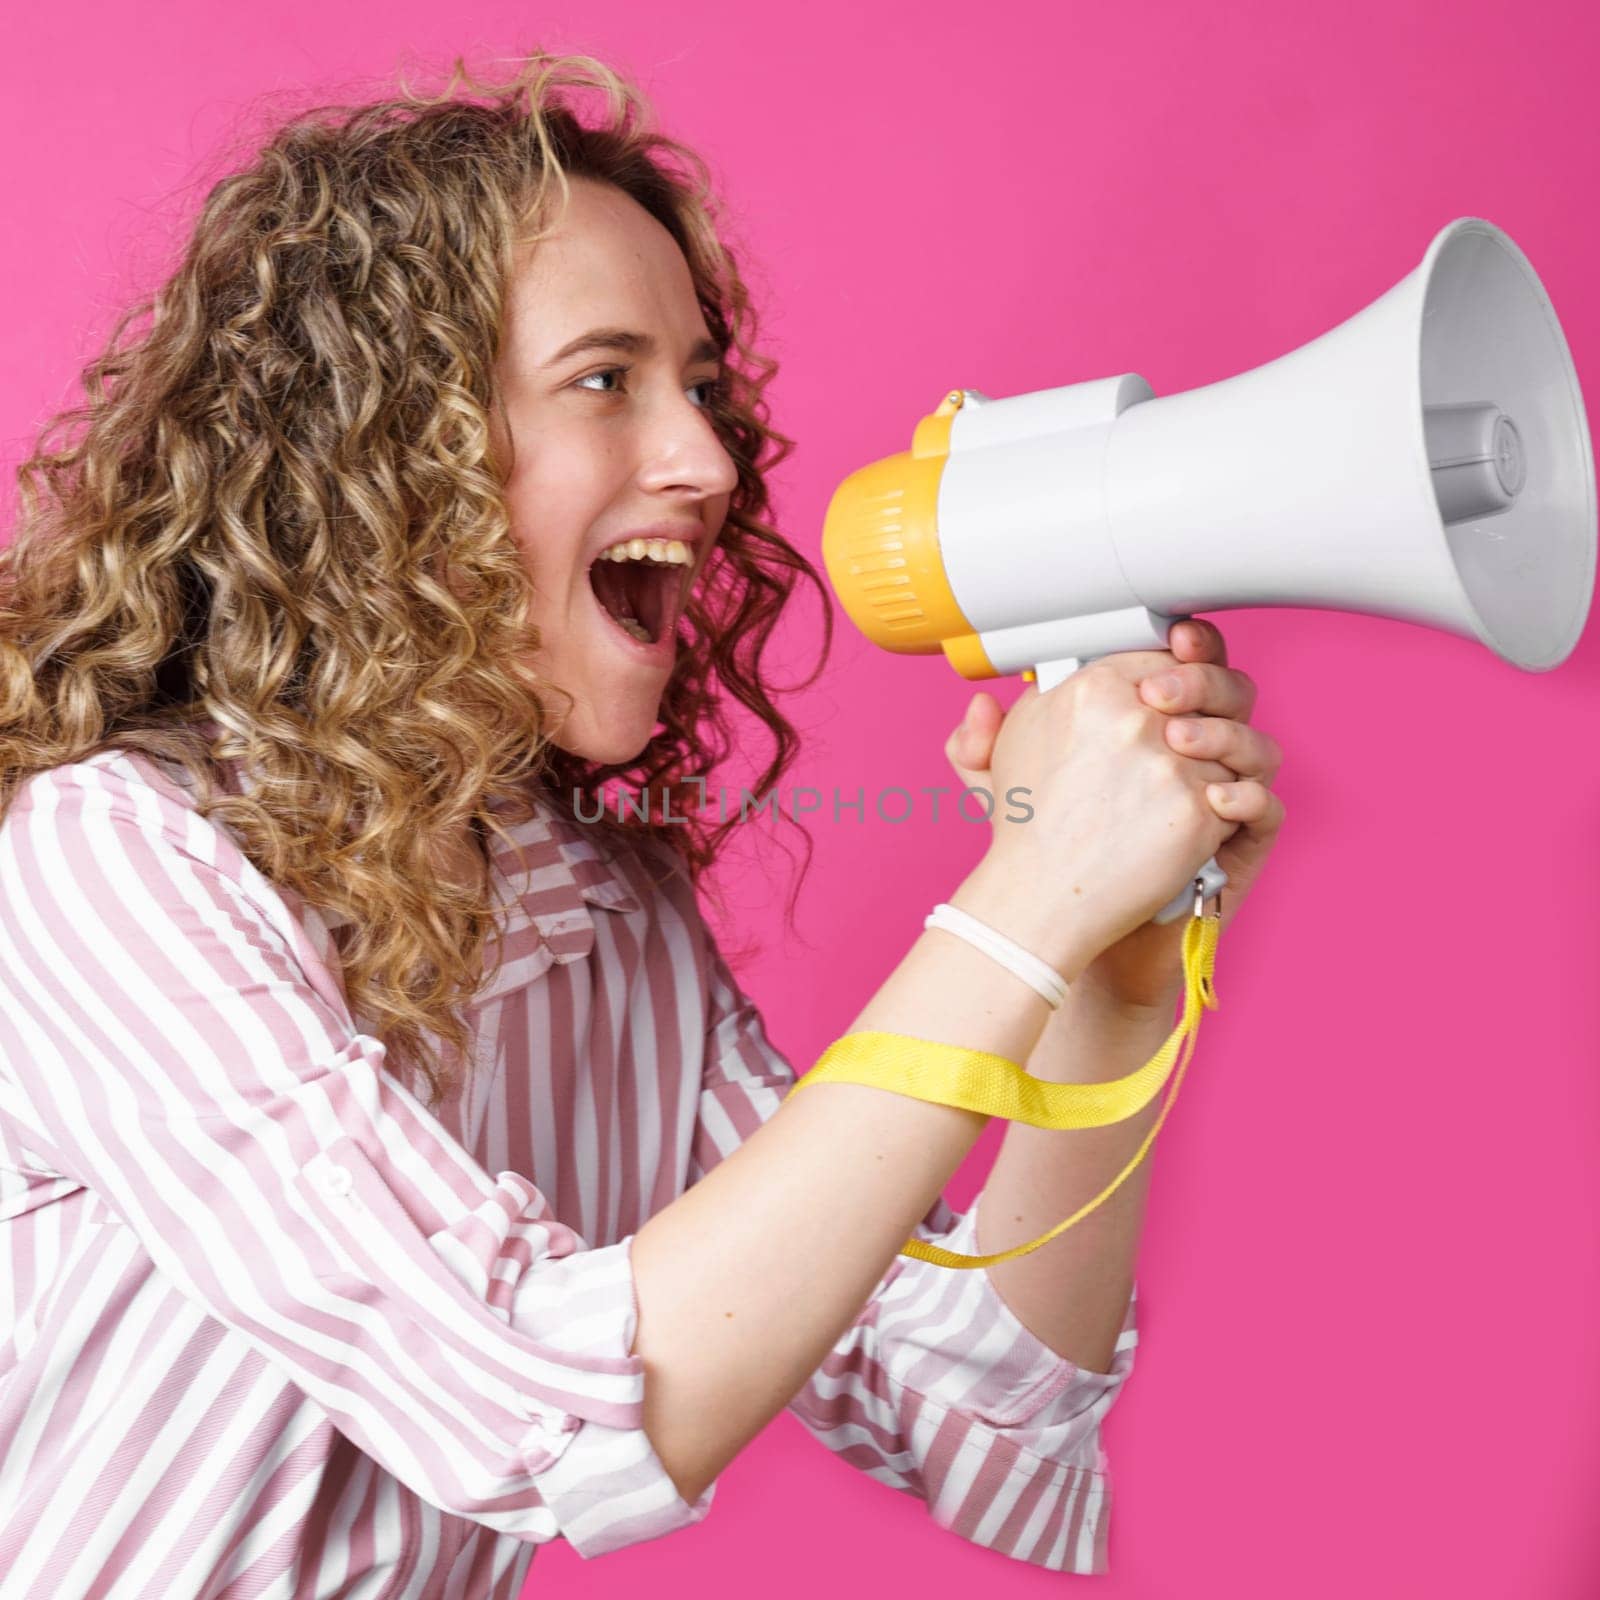 Young woman shouts into a megaphone. Isolated pink background. by Sd28DimoN_1976